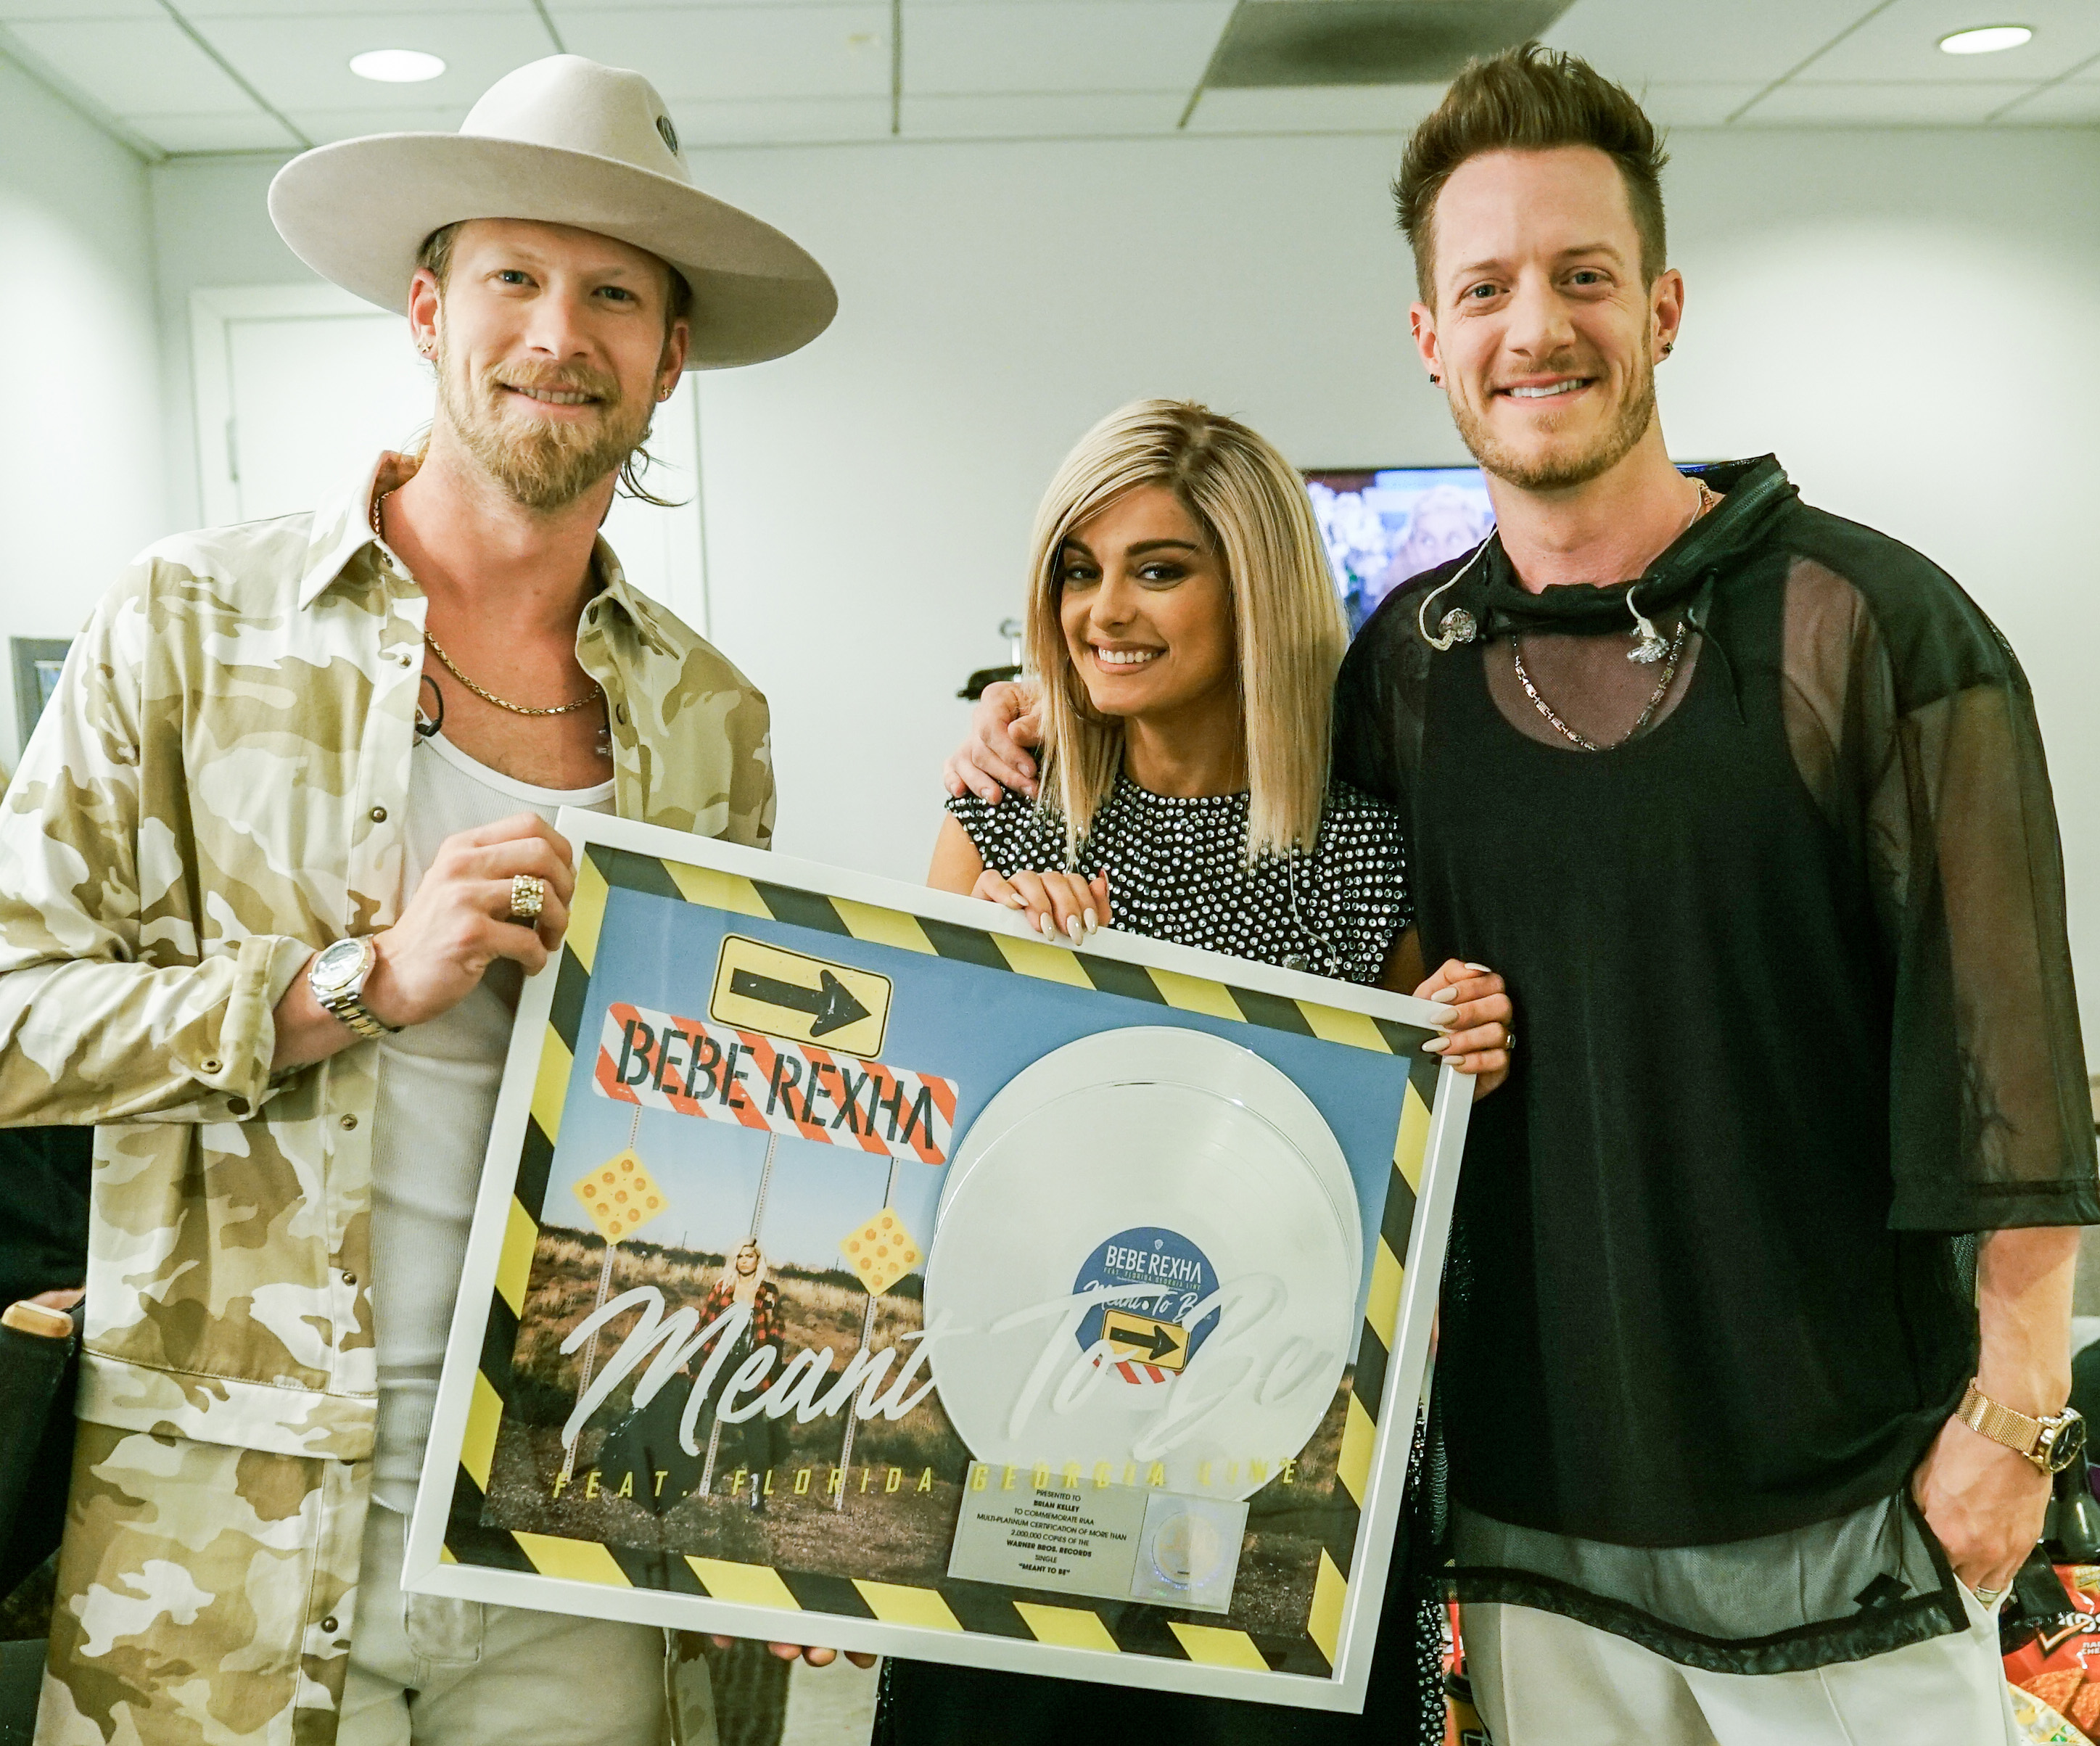 Florida Georgia Line’s “Meant to Be” with Bebe Rexha is Their 14th No. 1 Single